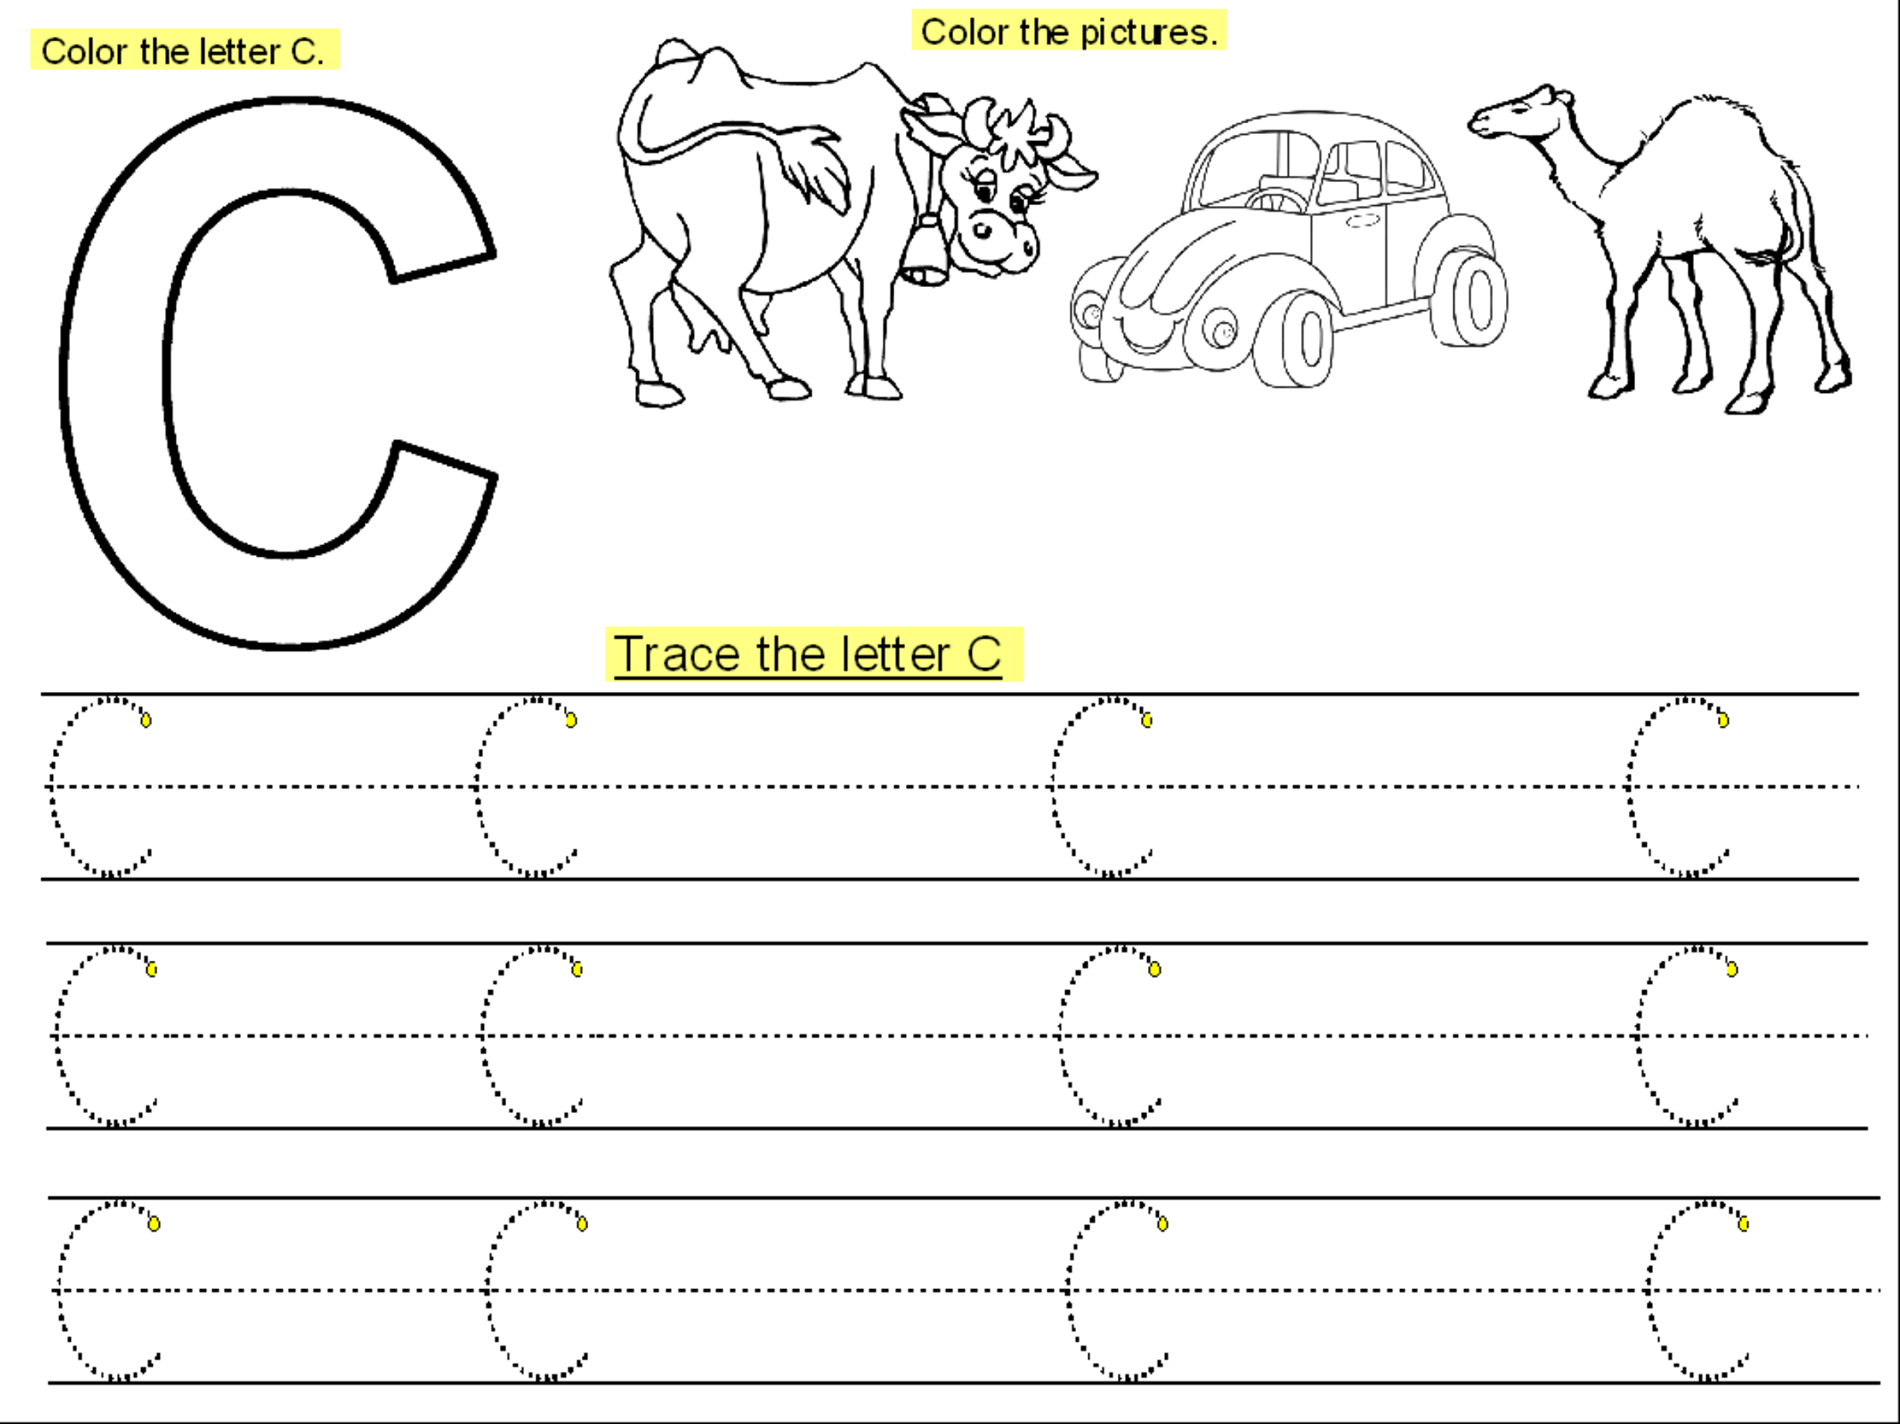 Trace The Letter C Worksheets | Letter C Worksheets pertaining to Letter C Tracing Printable